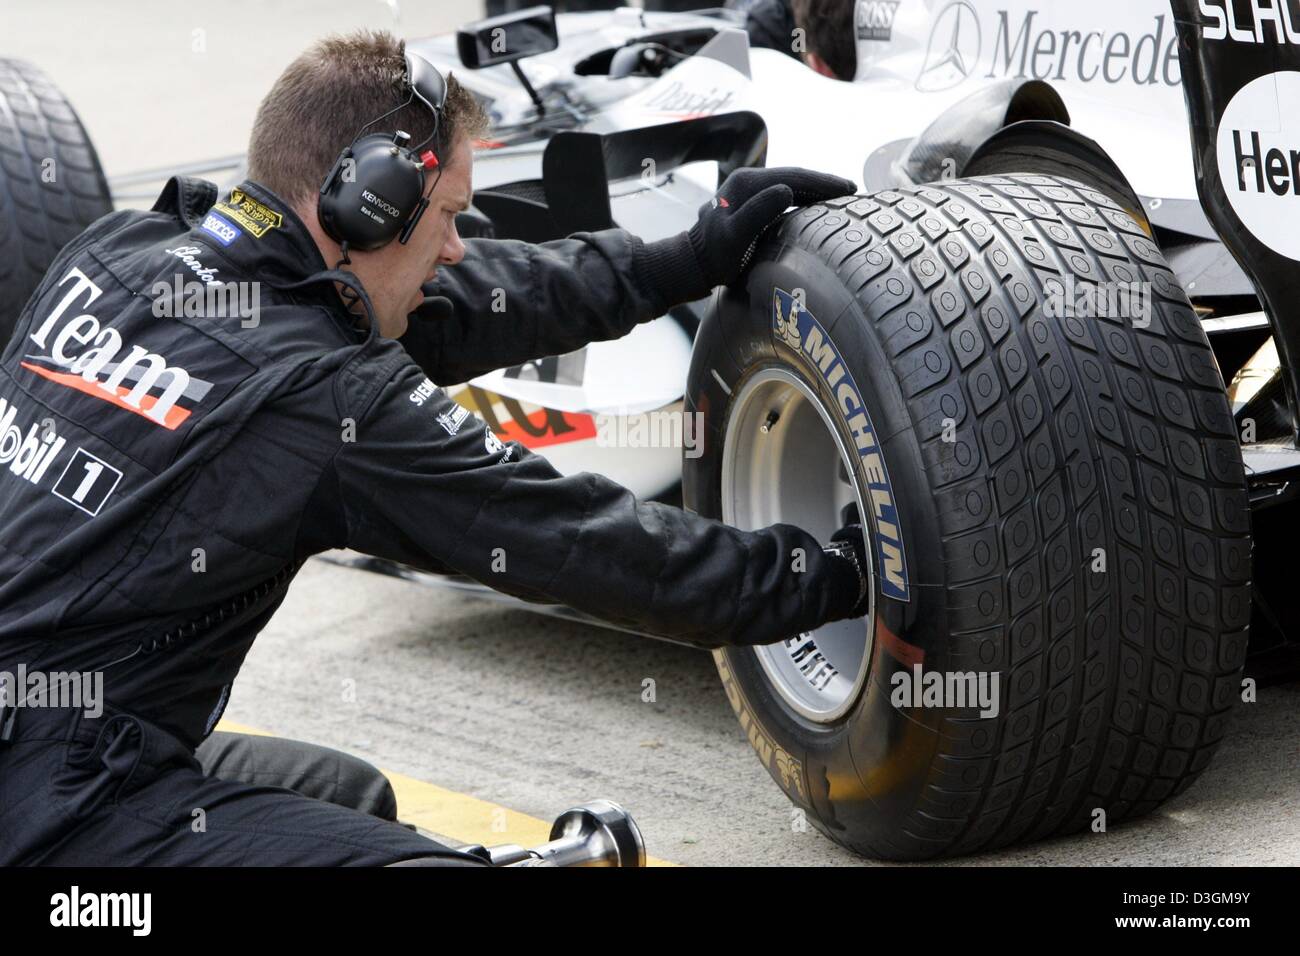 dpa) - A McLaren-Mercedes mechanic screws a rain tyre onto the wheel rim of  David Coulthard's race car at the Silverstone race course in Silverstone,  Great Britain, Thursday 8 July 2004. On